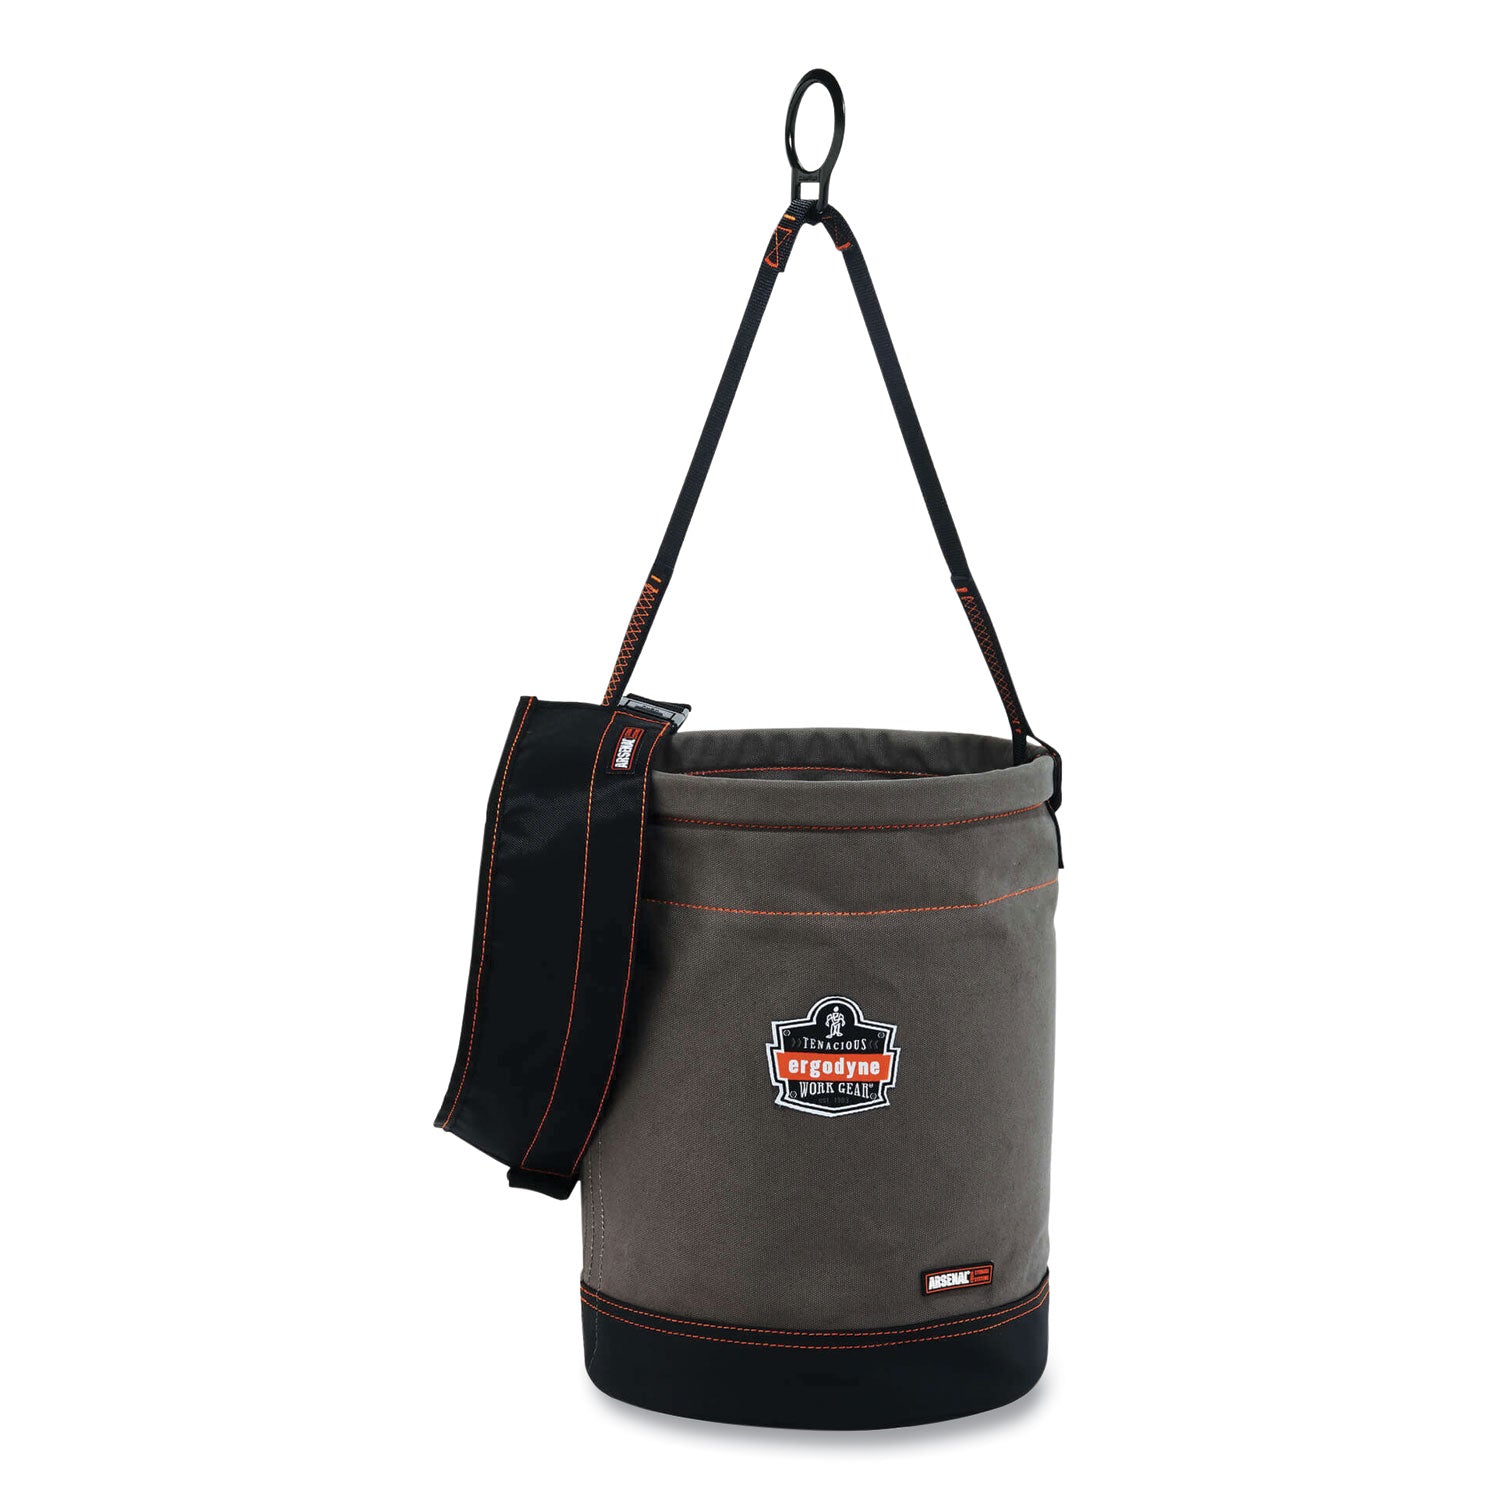 arsenal-5960t-canvas-hoist-bucket-and-top-with-d-rings-125-x-125-x-17-gray-ships-in-1-3-business-days_ego14860 - 2